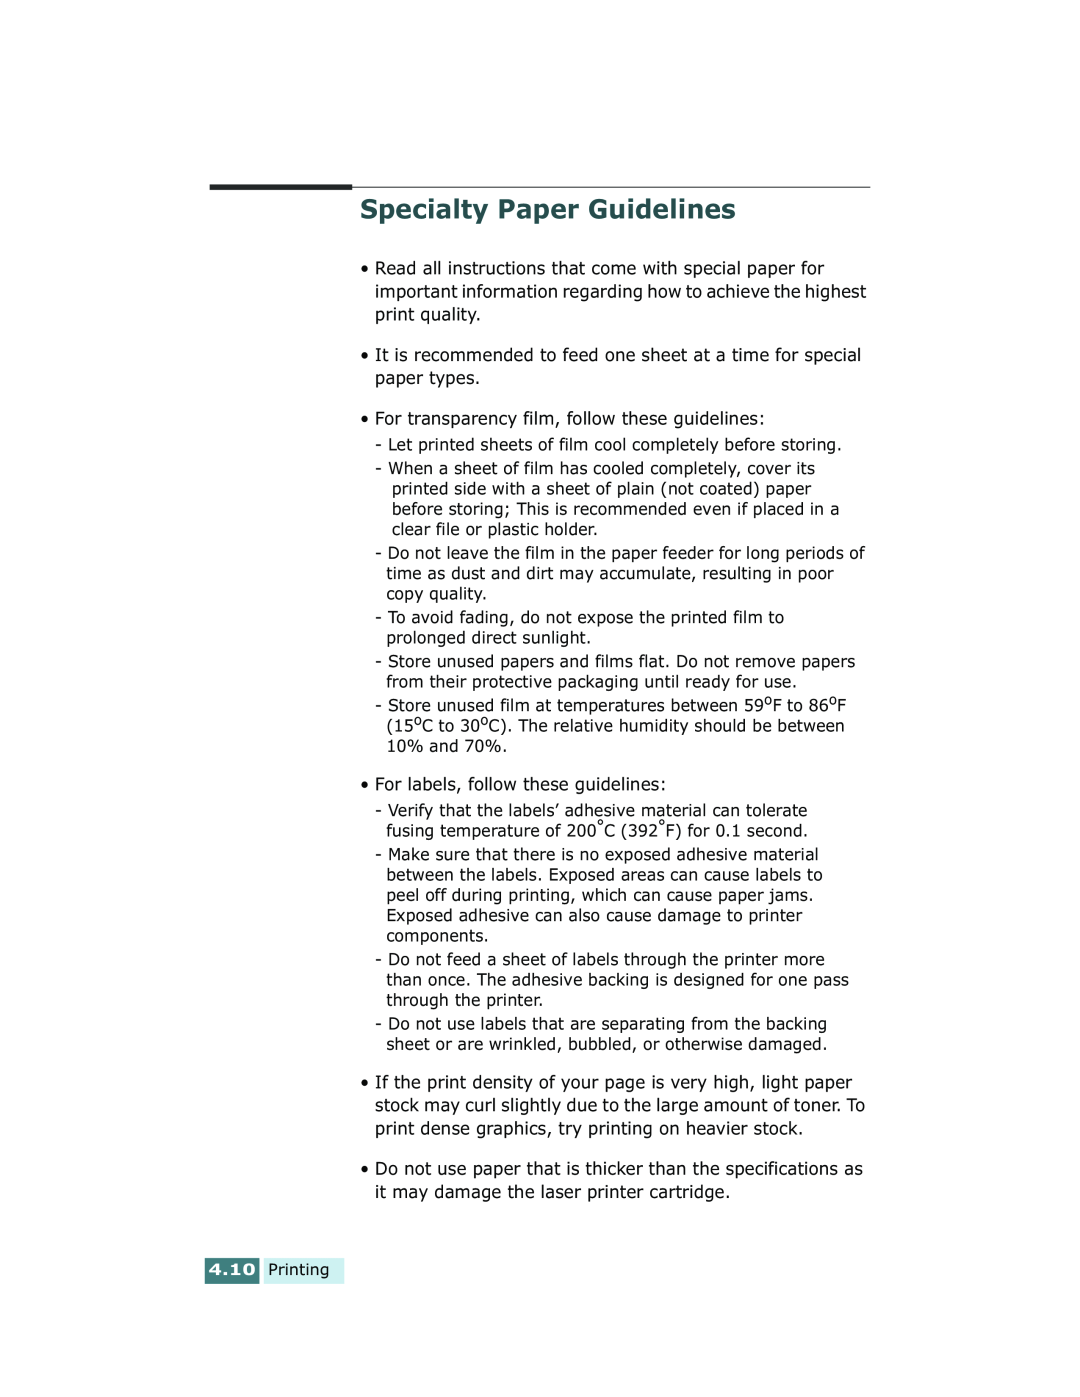 Xerox Pro 580 manual Specialty Paper Guidelines 